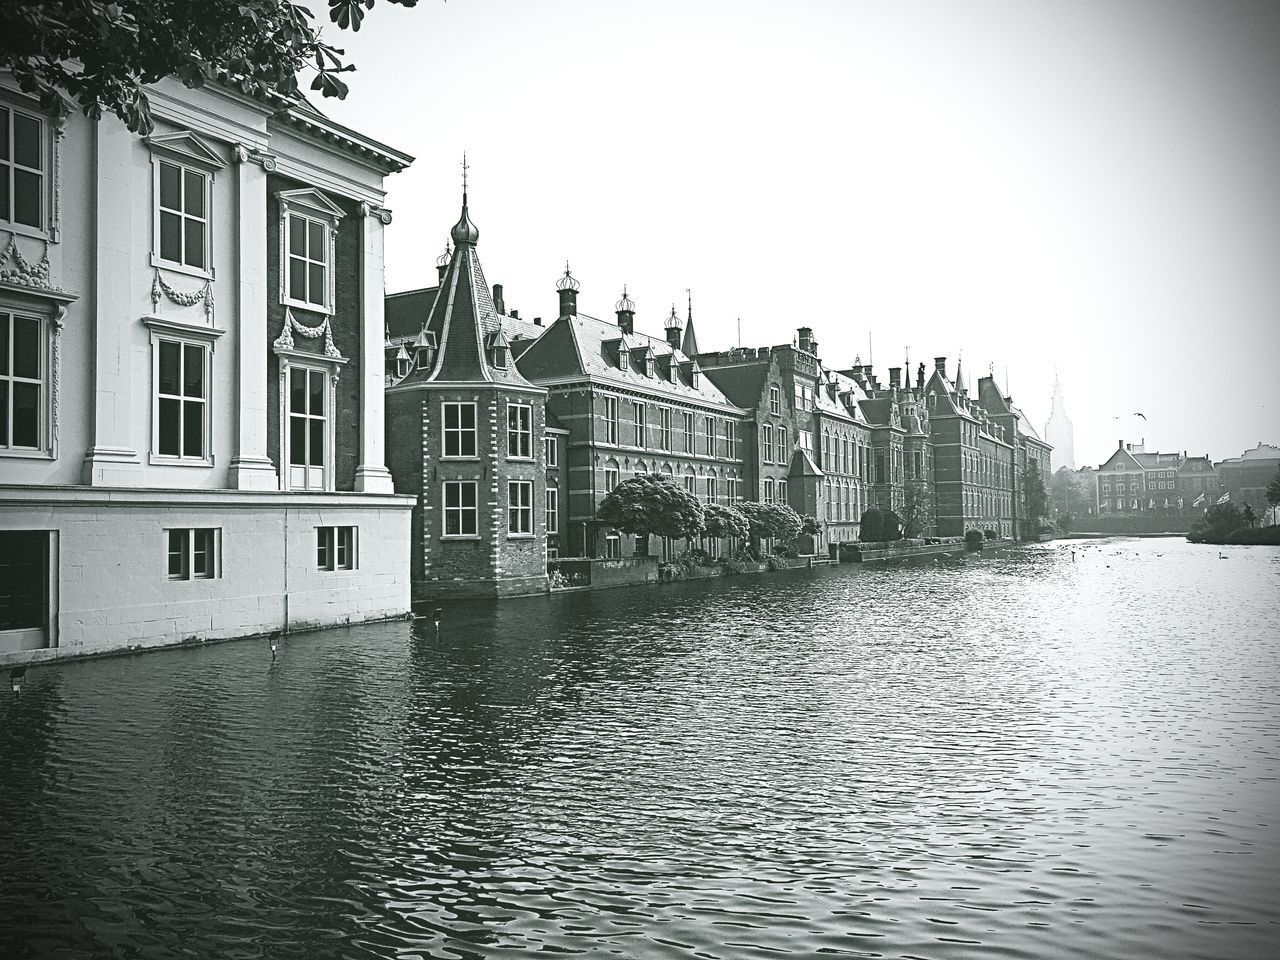 VIEW OF BUILDINGS BY RIVER